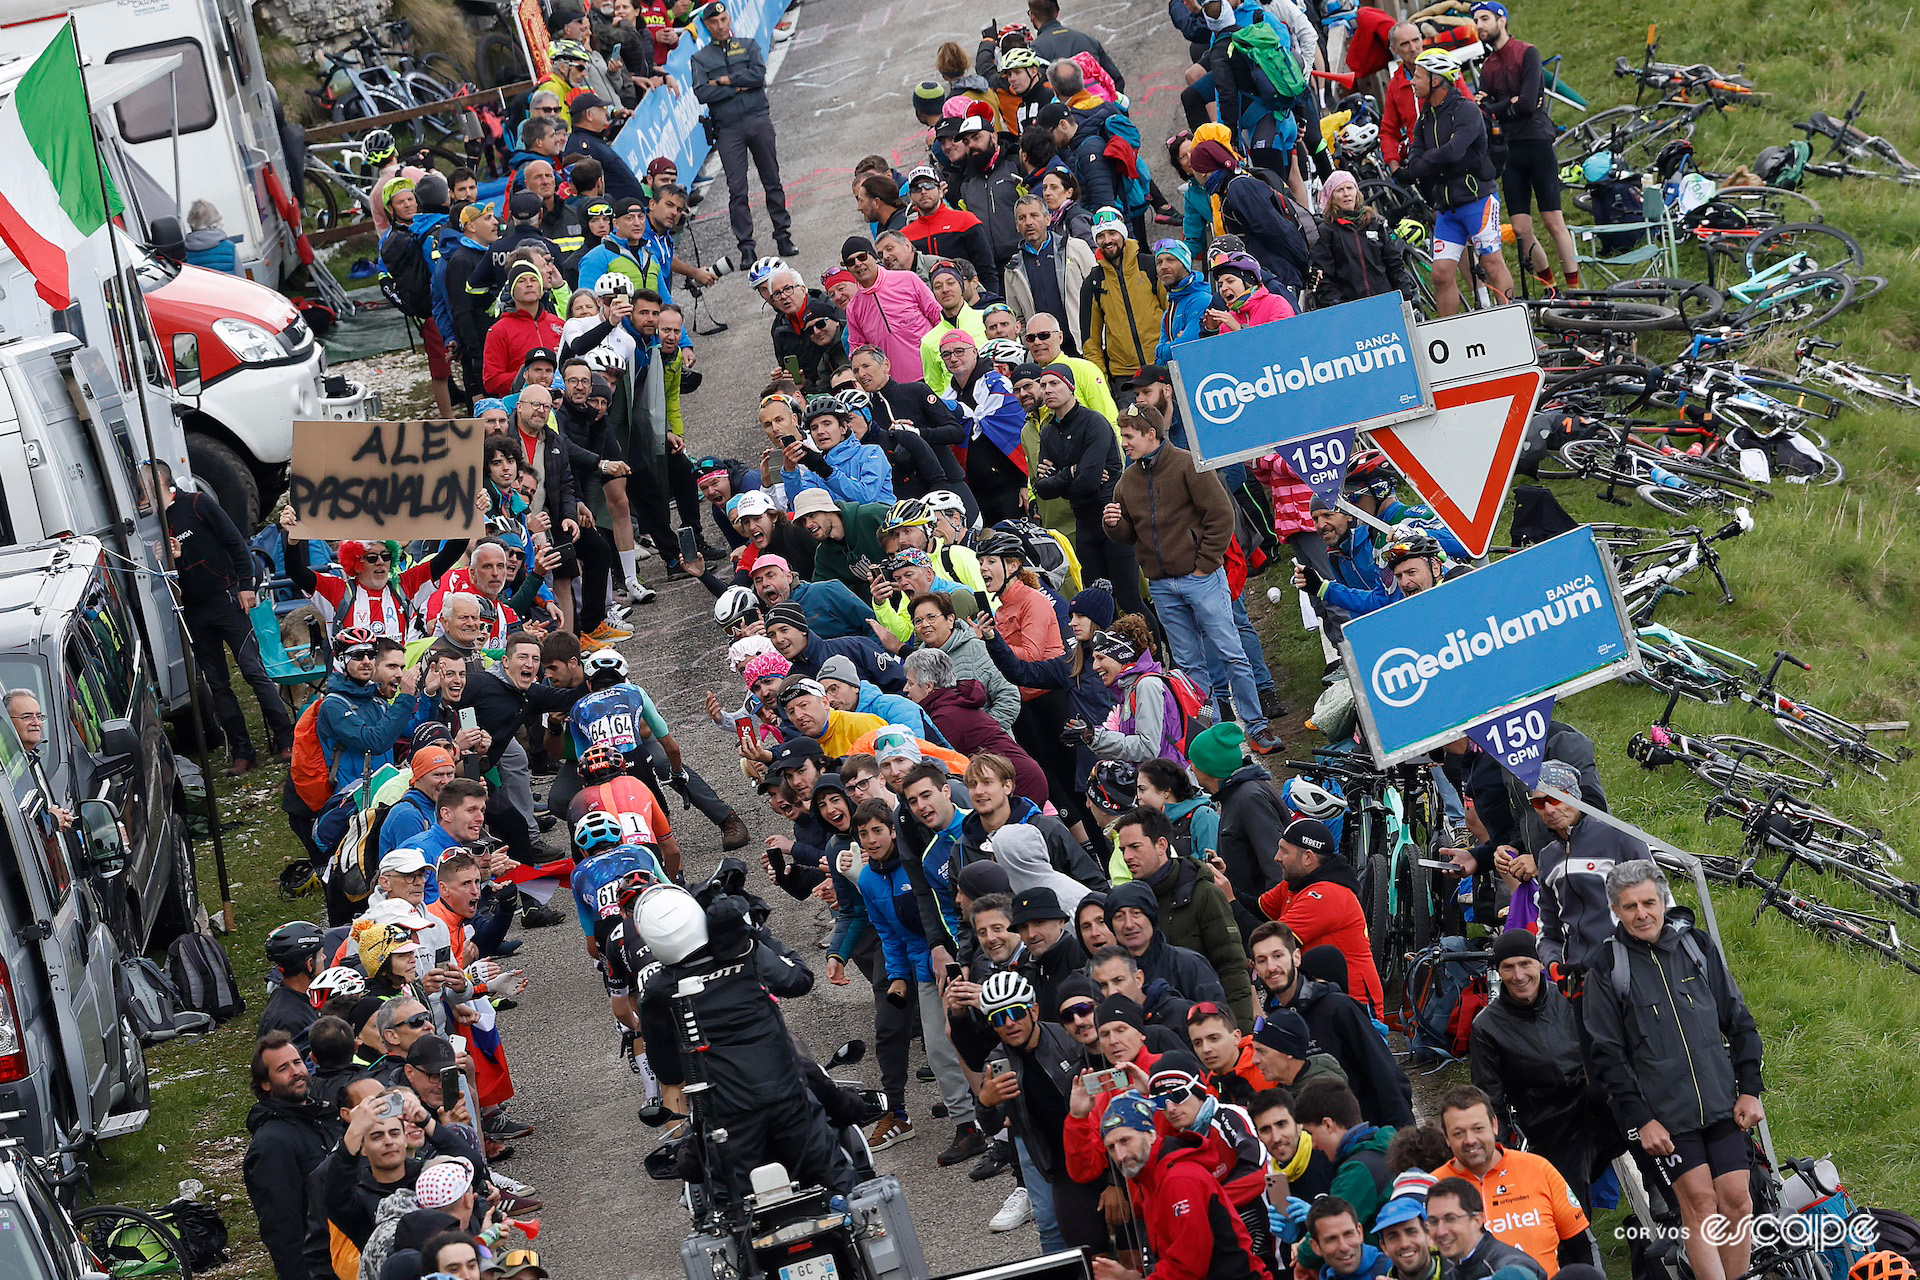 Valentin Paret-Peintre, Geraint Thomas and Ben O'Connor ride up a narrow path through the crowd near the top of the Monte Grappa climb on stage 20 of the 2024 Giro d'Italia.